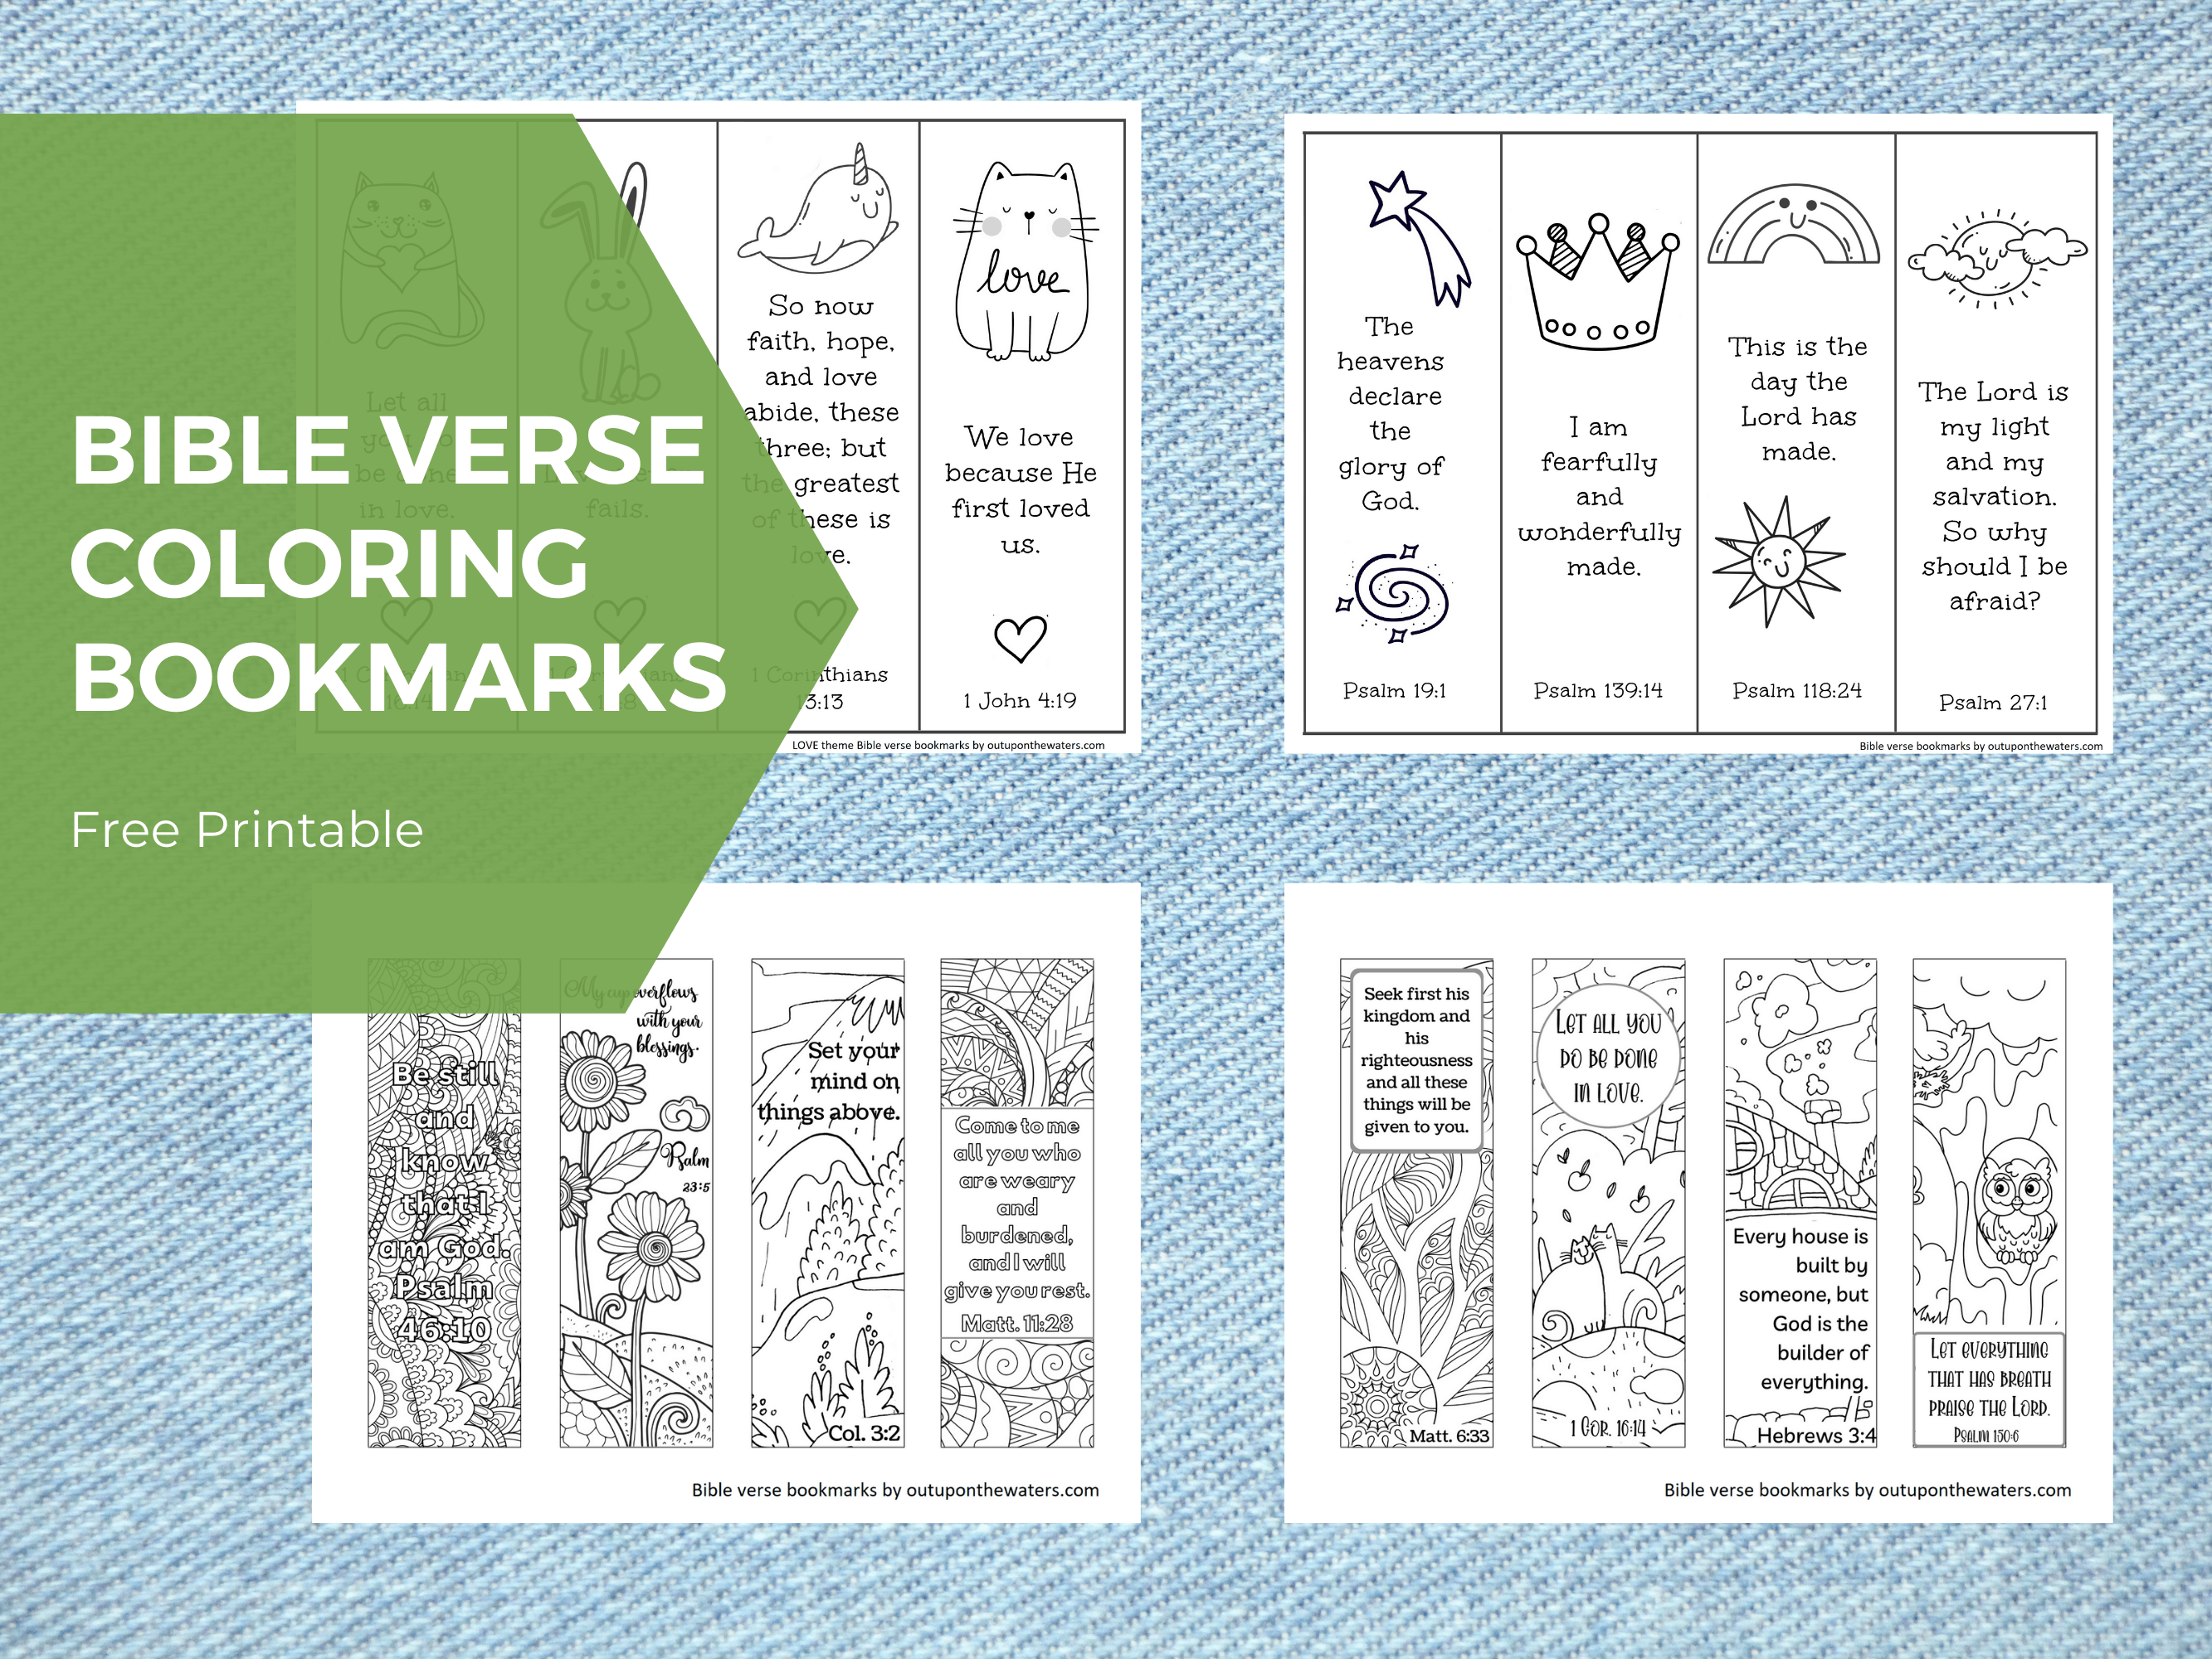 Printable Coloring Bookmarks, Digital Book Marks, Cute Printable Book Mark,  Kids and Adult Coloring Pages 